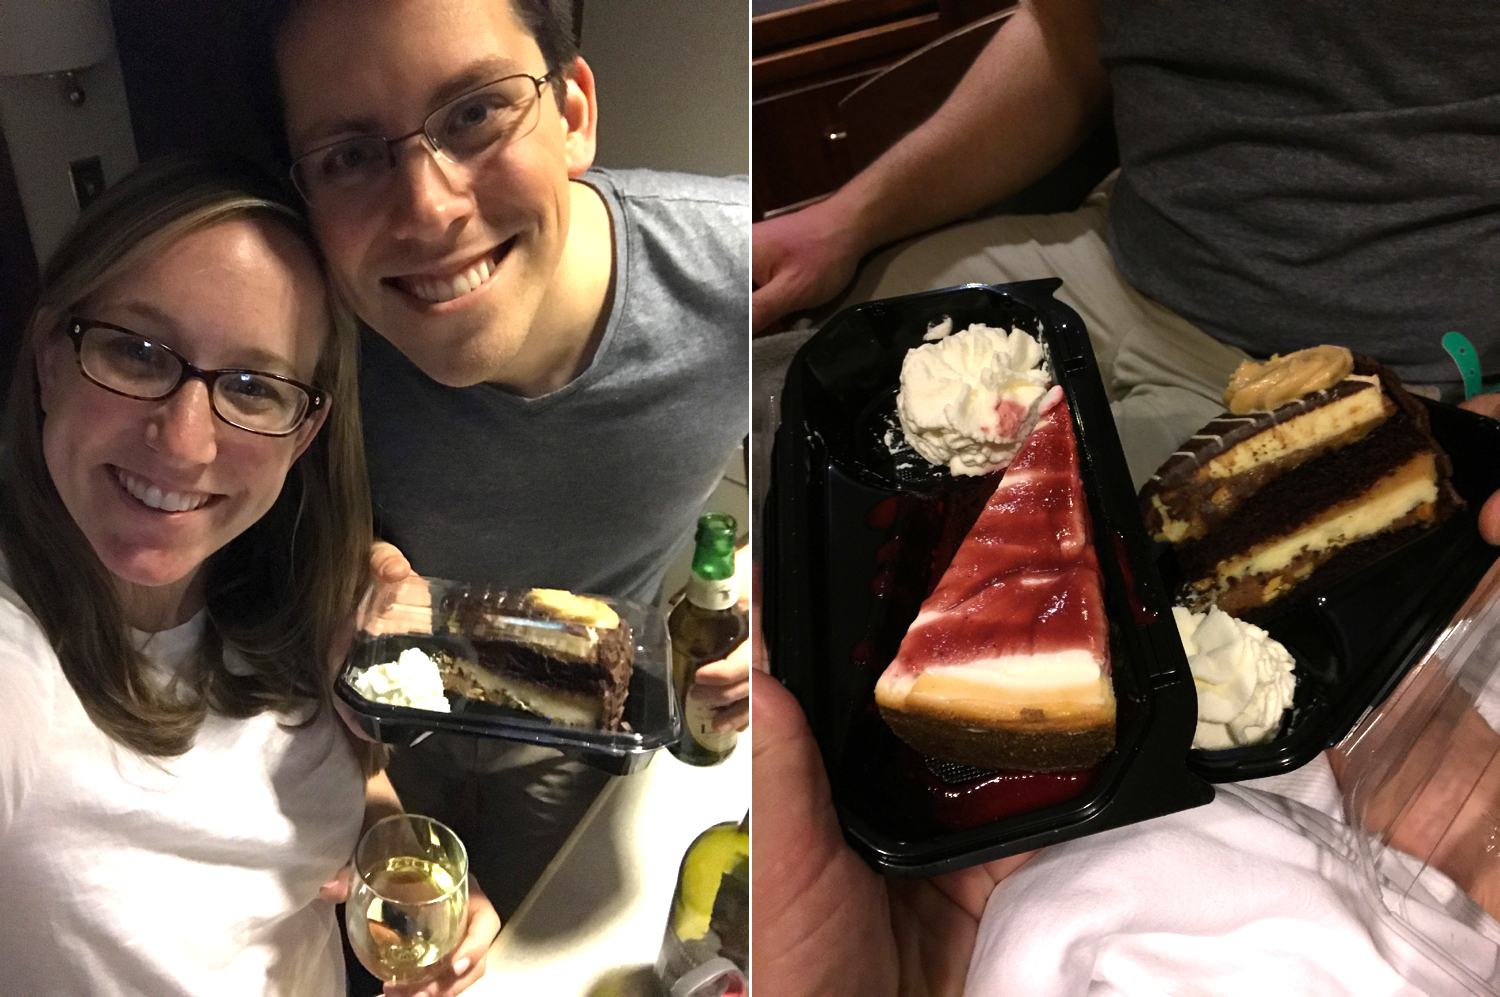  Celebrating Valentine's Day in the hospital! Thanks for the cheesecake + wine delivery mom! 